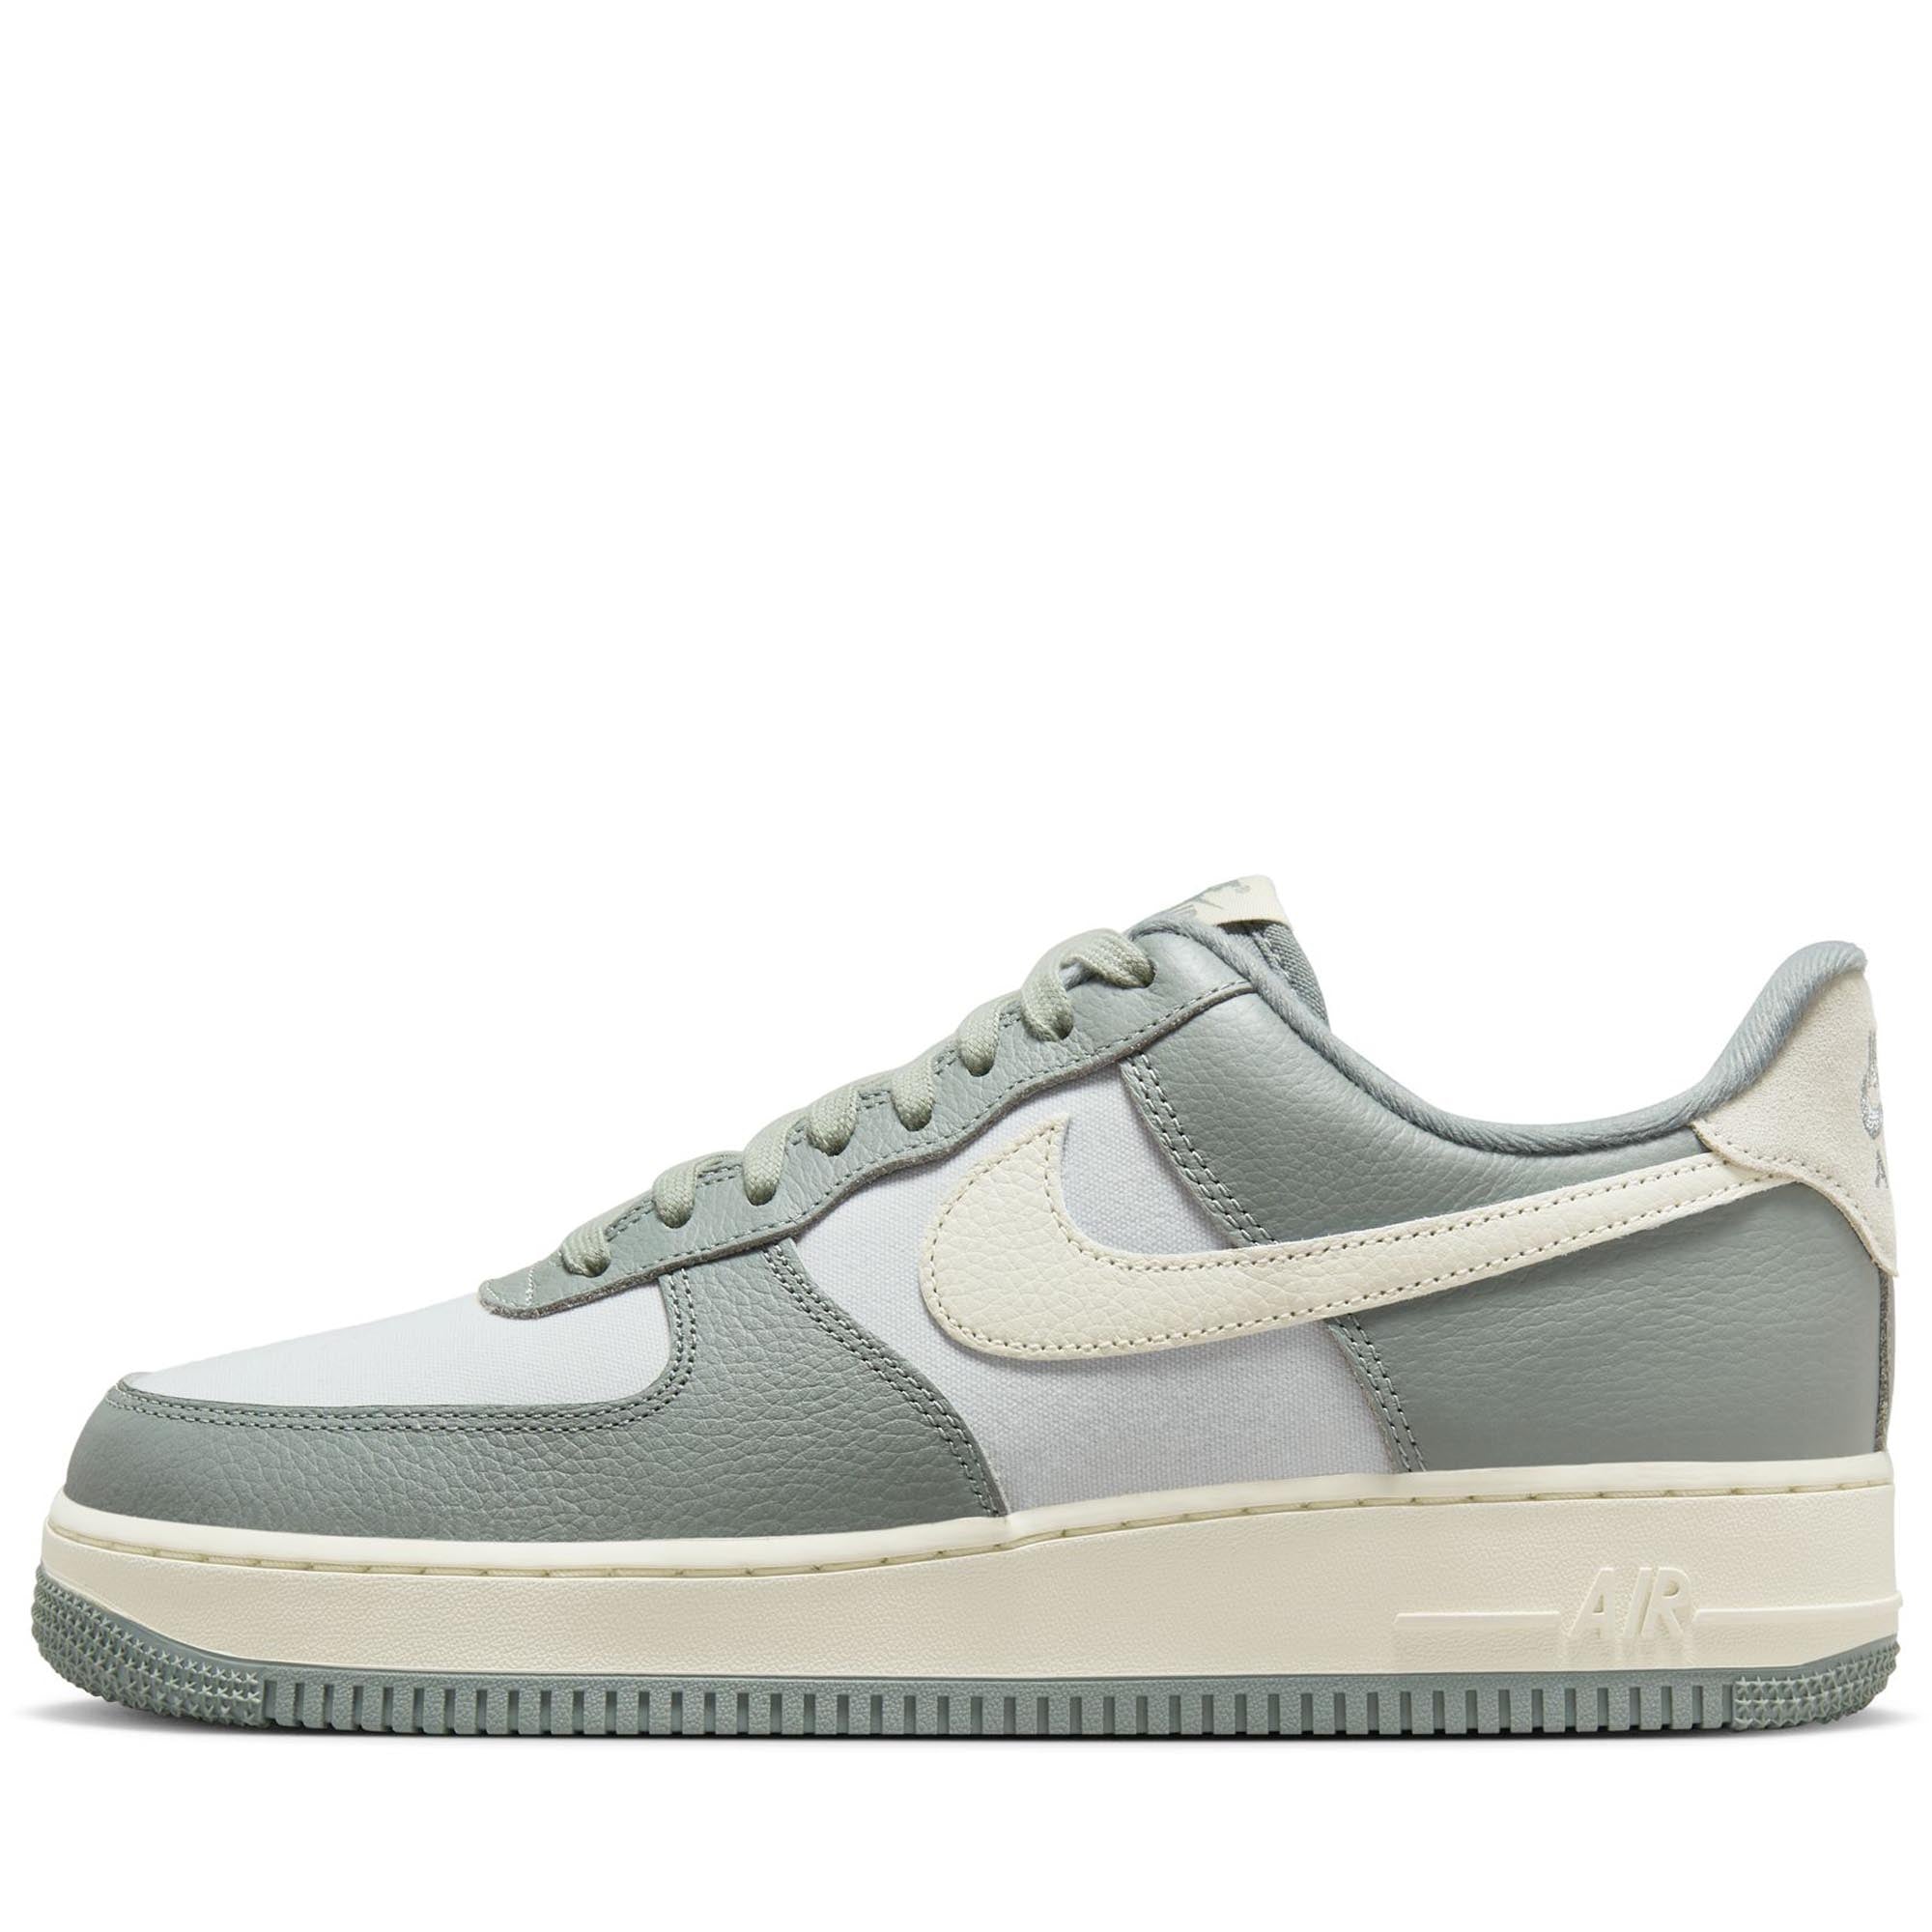 NIKE AIR FORCE 1 '07 LX 'MICA GREEN/COCONUT MILK-PHOTON DUST' is available  in-stores and on vegnonveg.com 11,895 INR, UK 7-12 The…